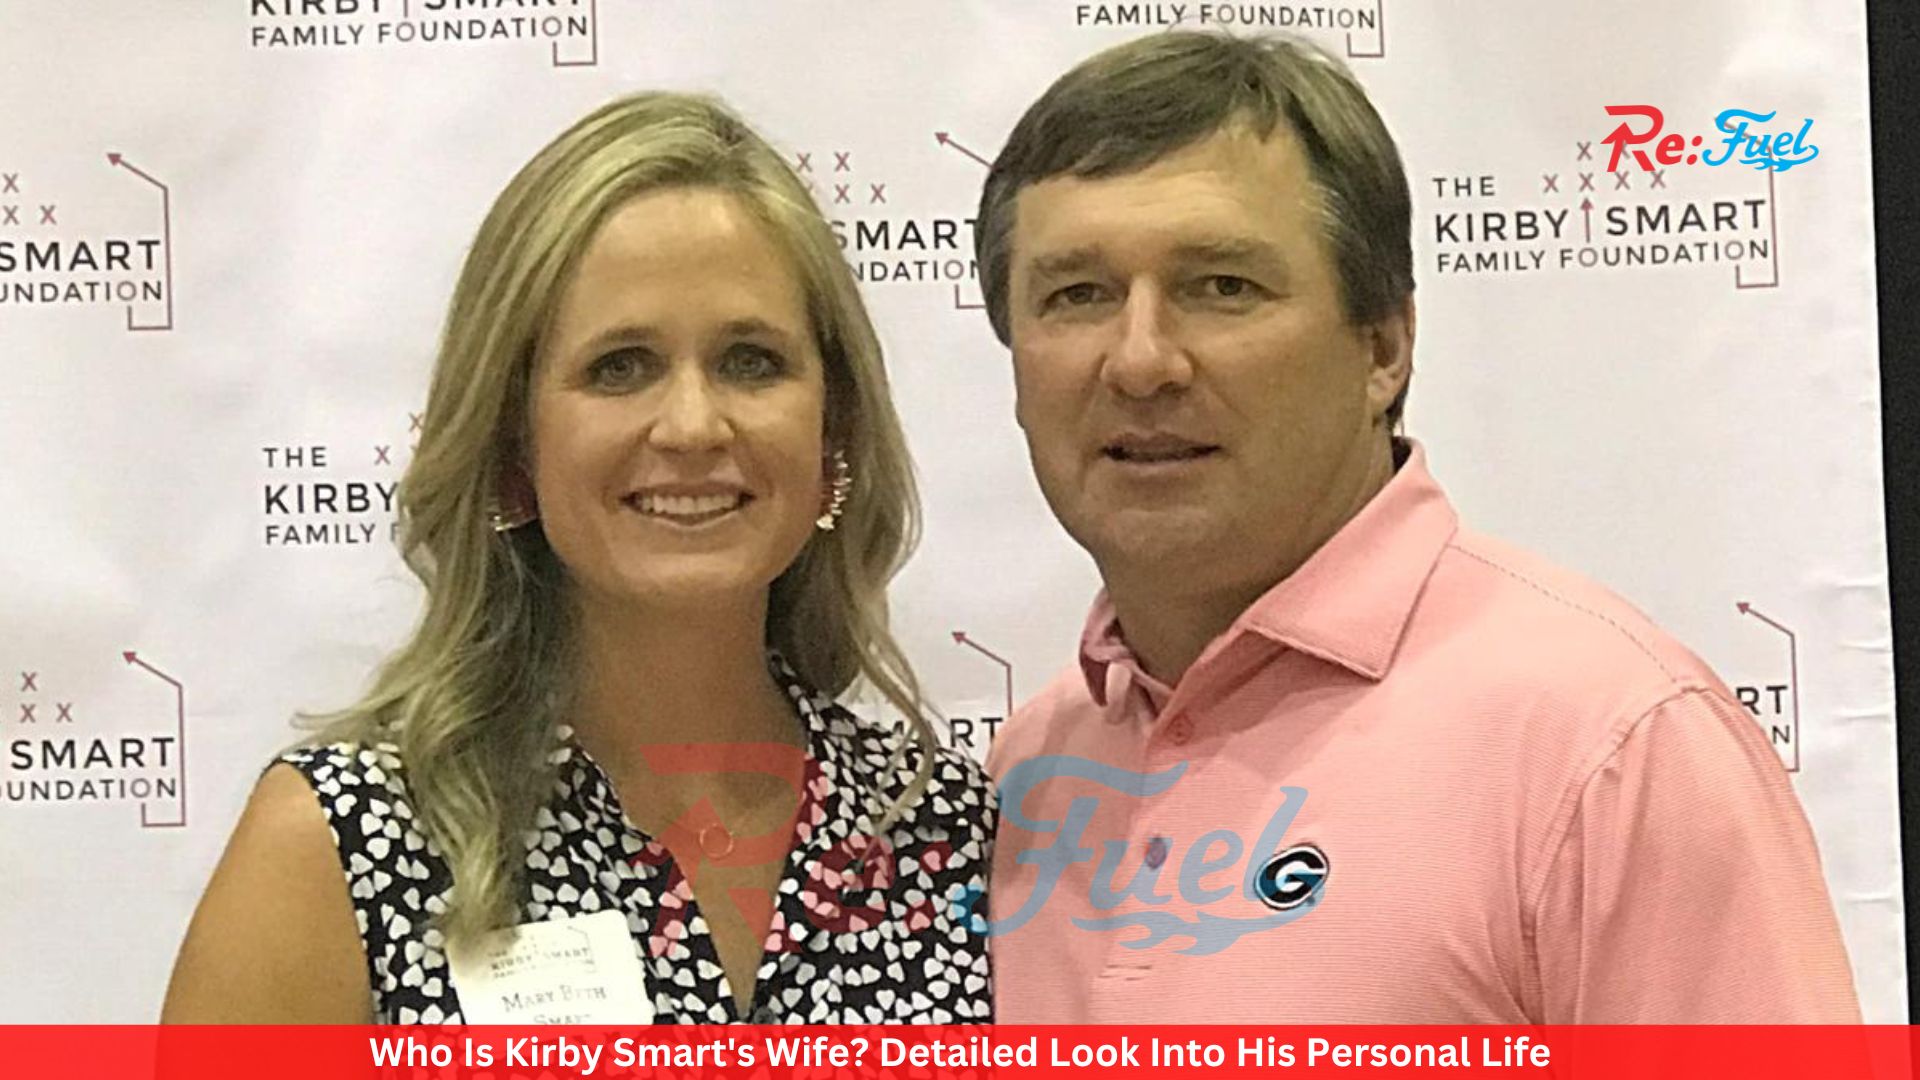 Who Is Kirby Smart's Wife? Detailed Look Into His Personal Life